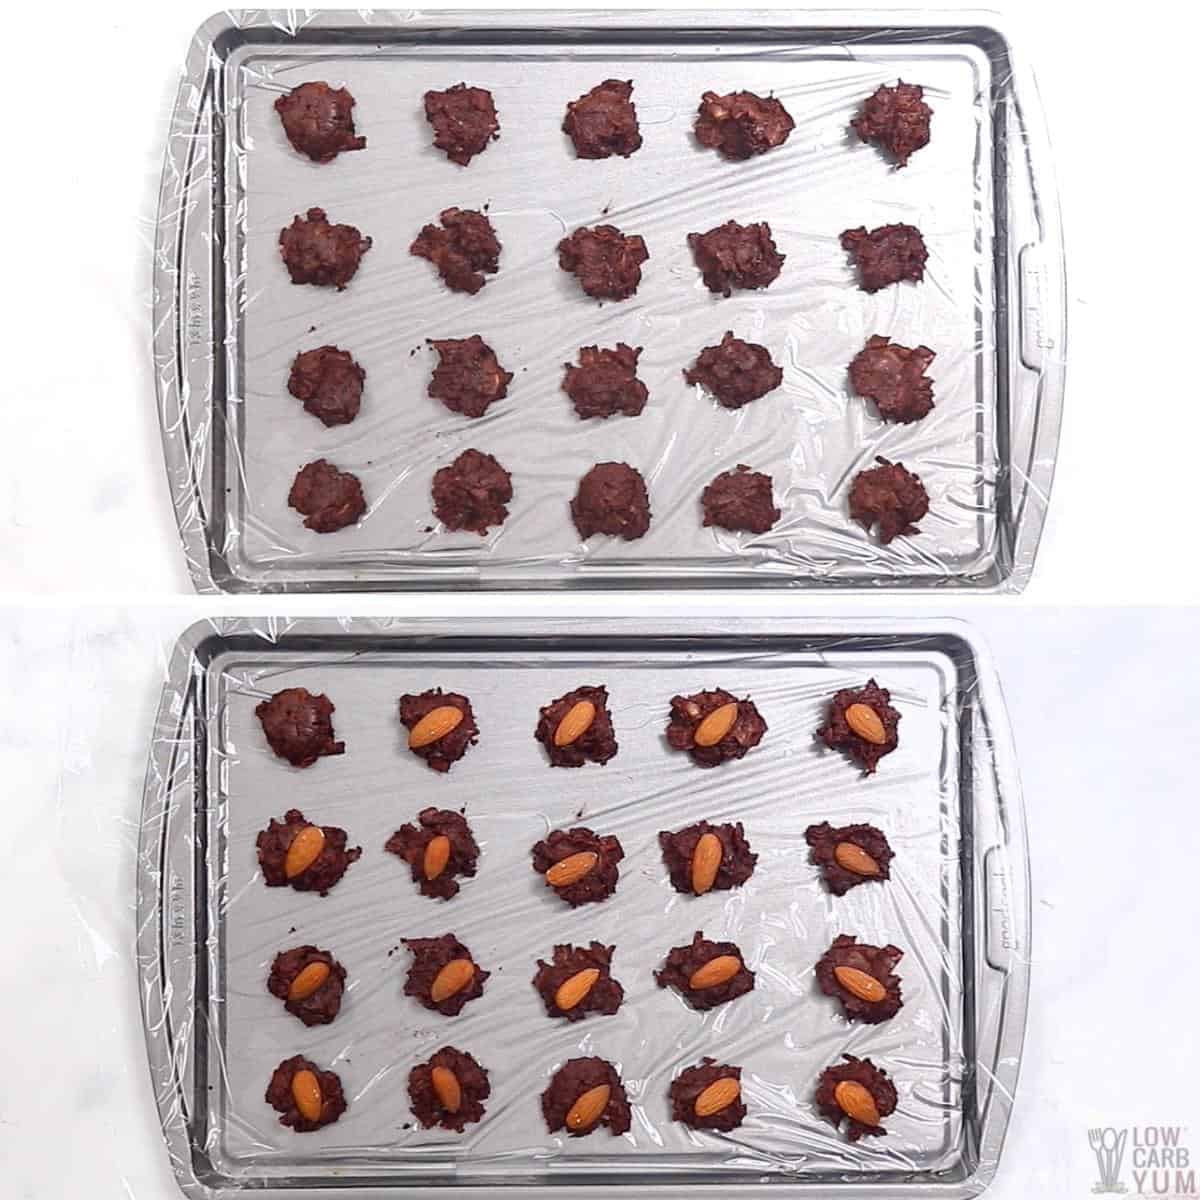 assembling the candies on lined sheet pan.